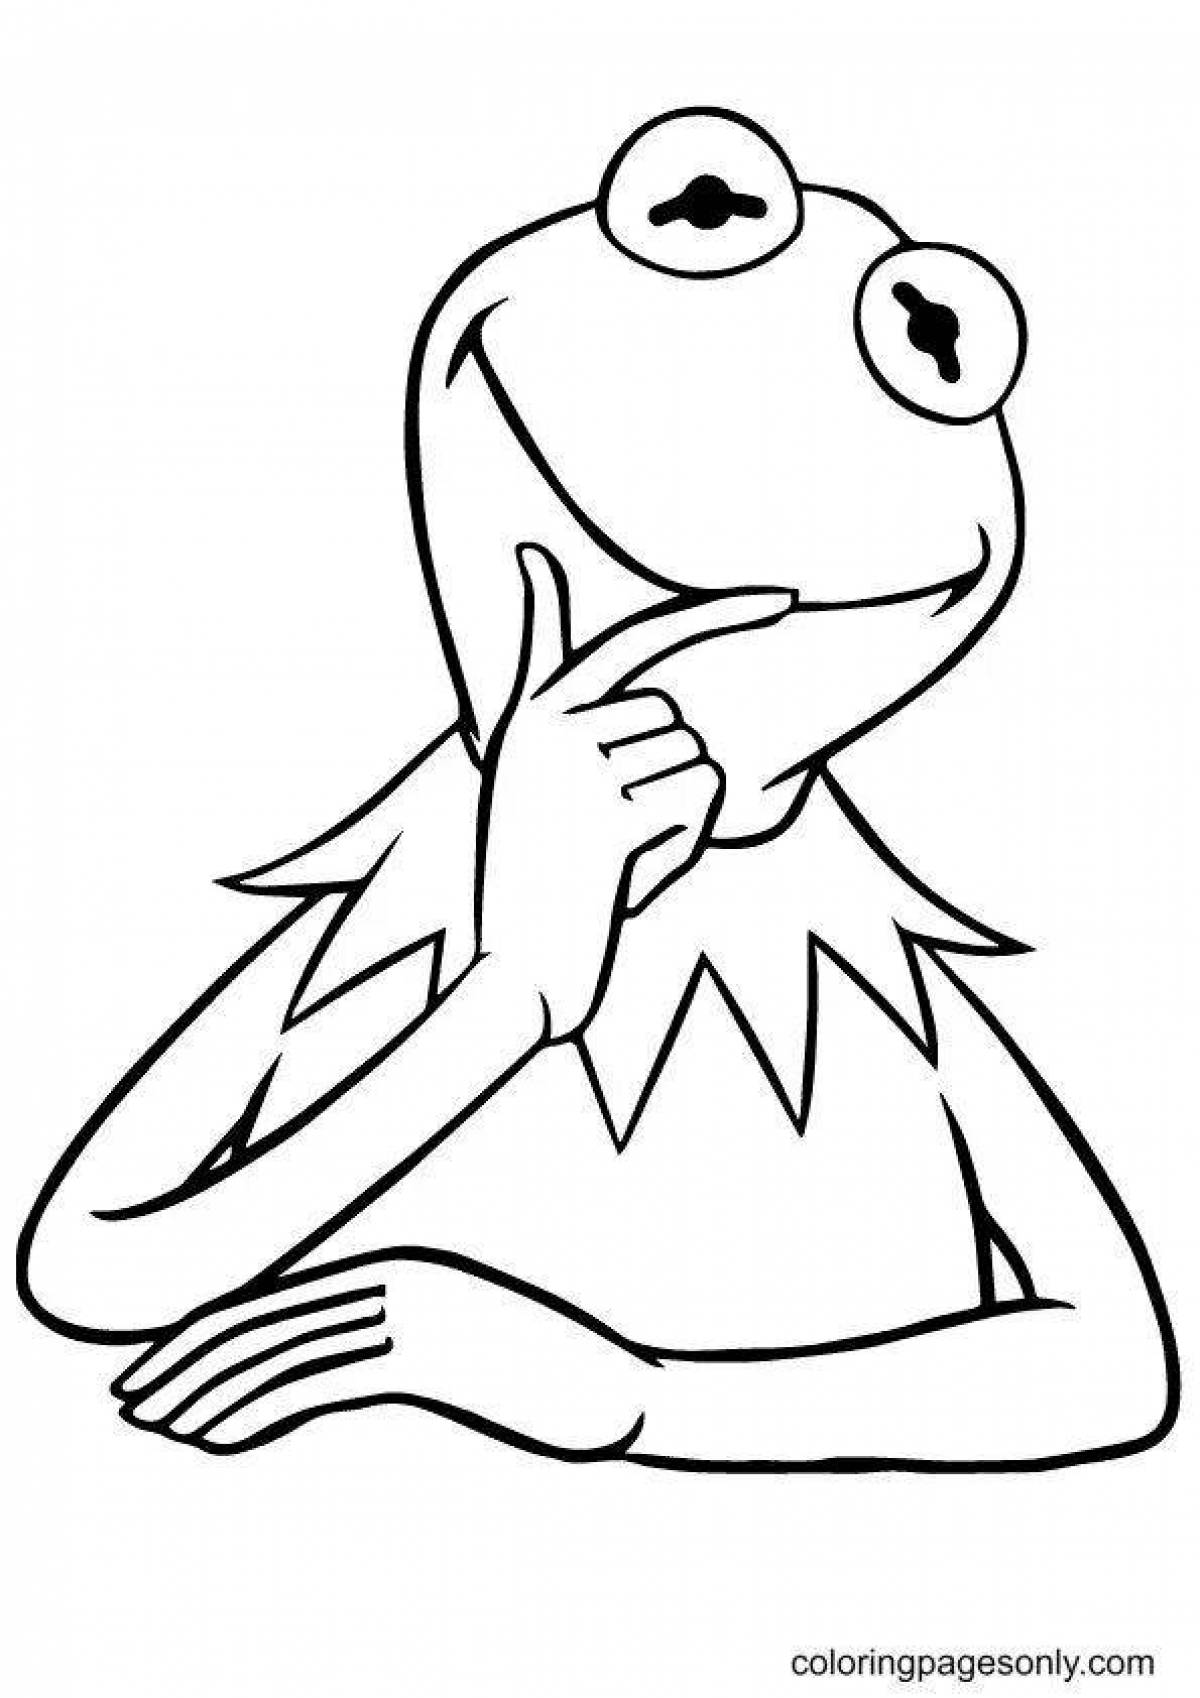 Frog aesthetics coloring page